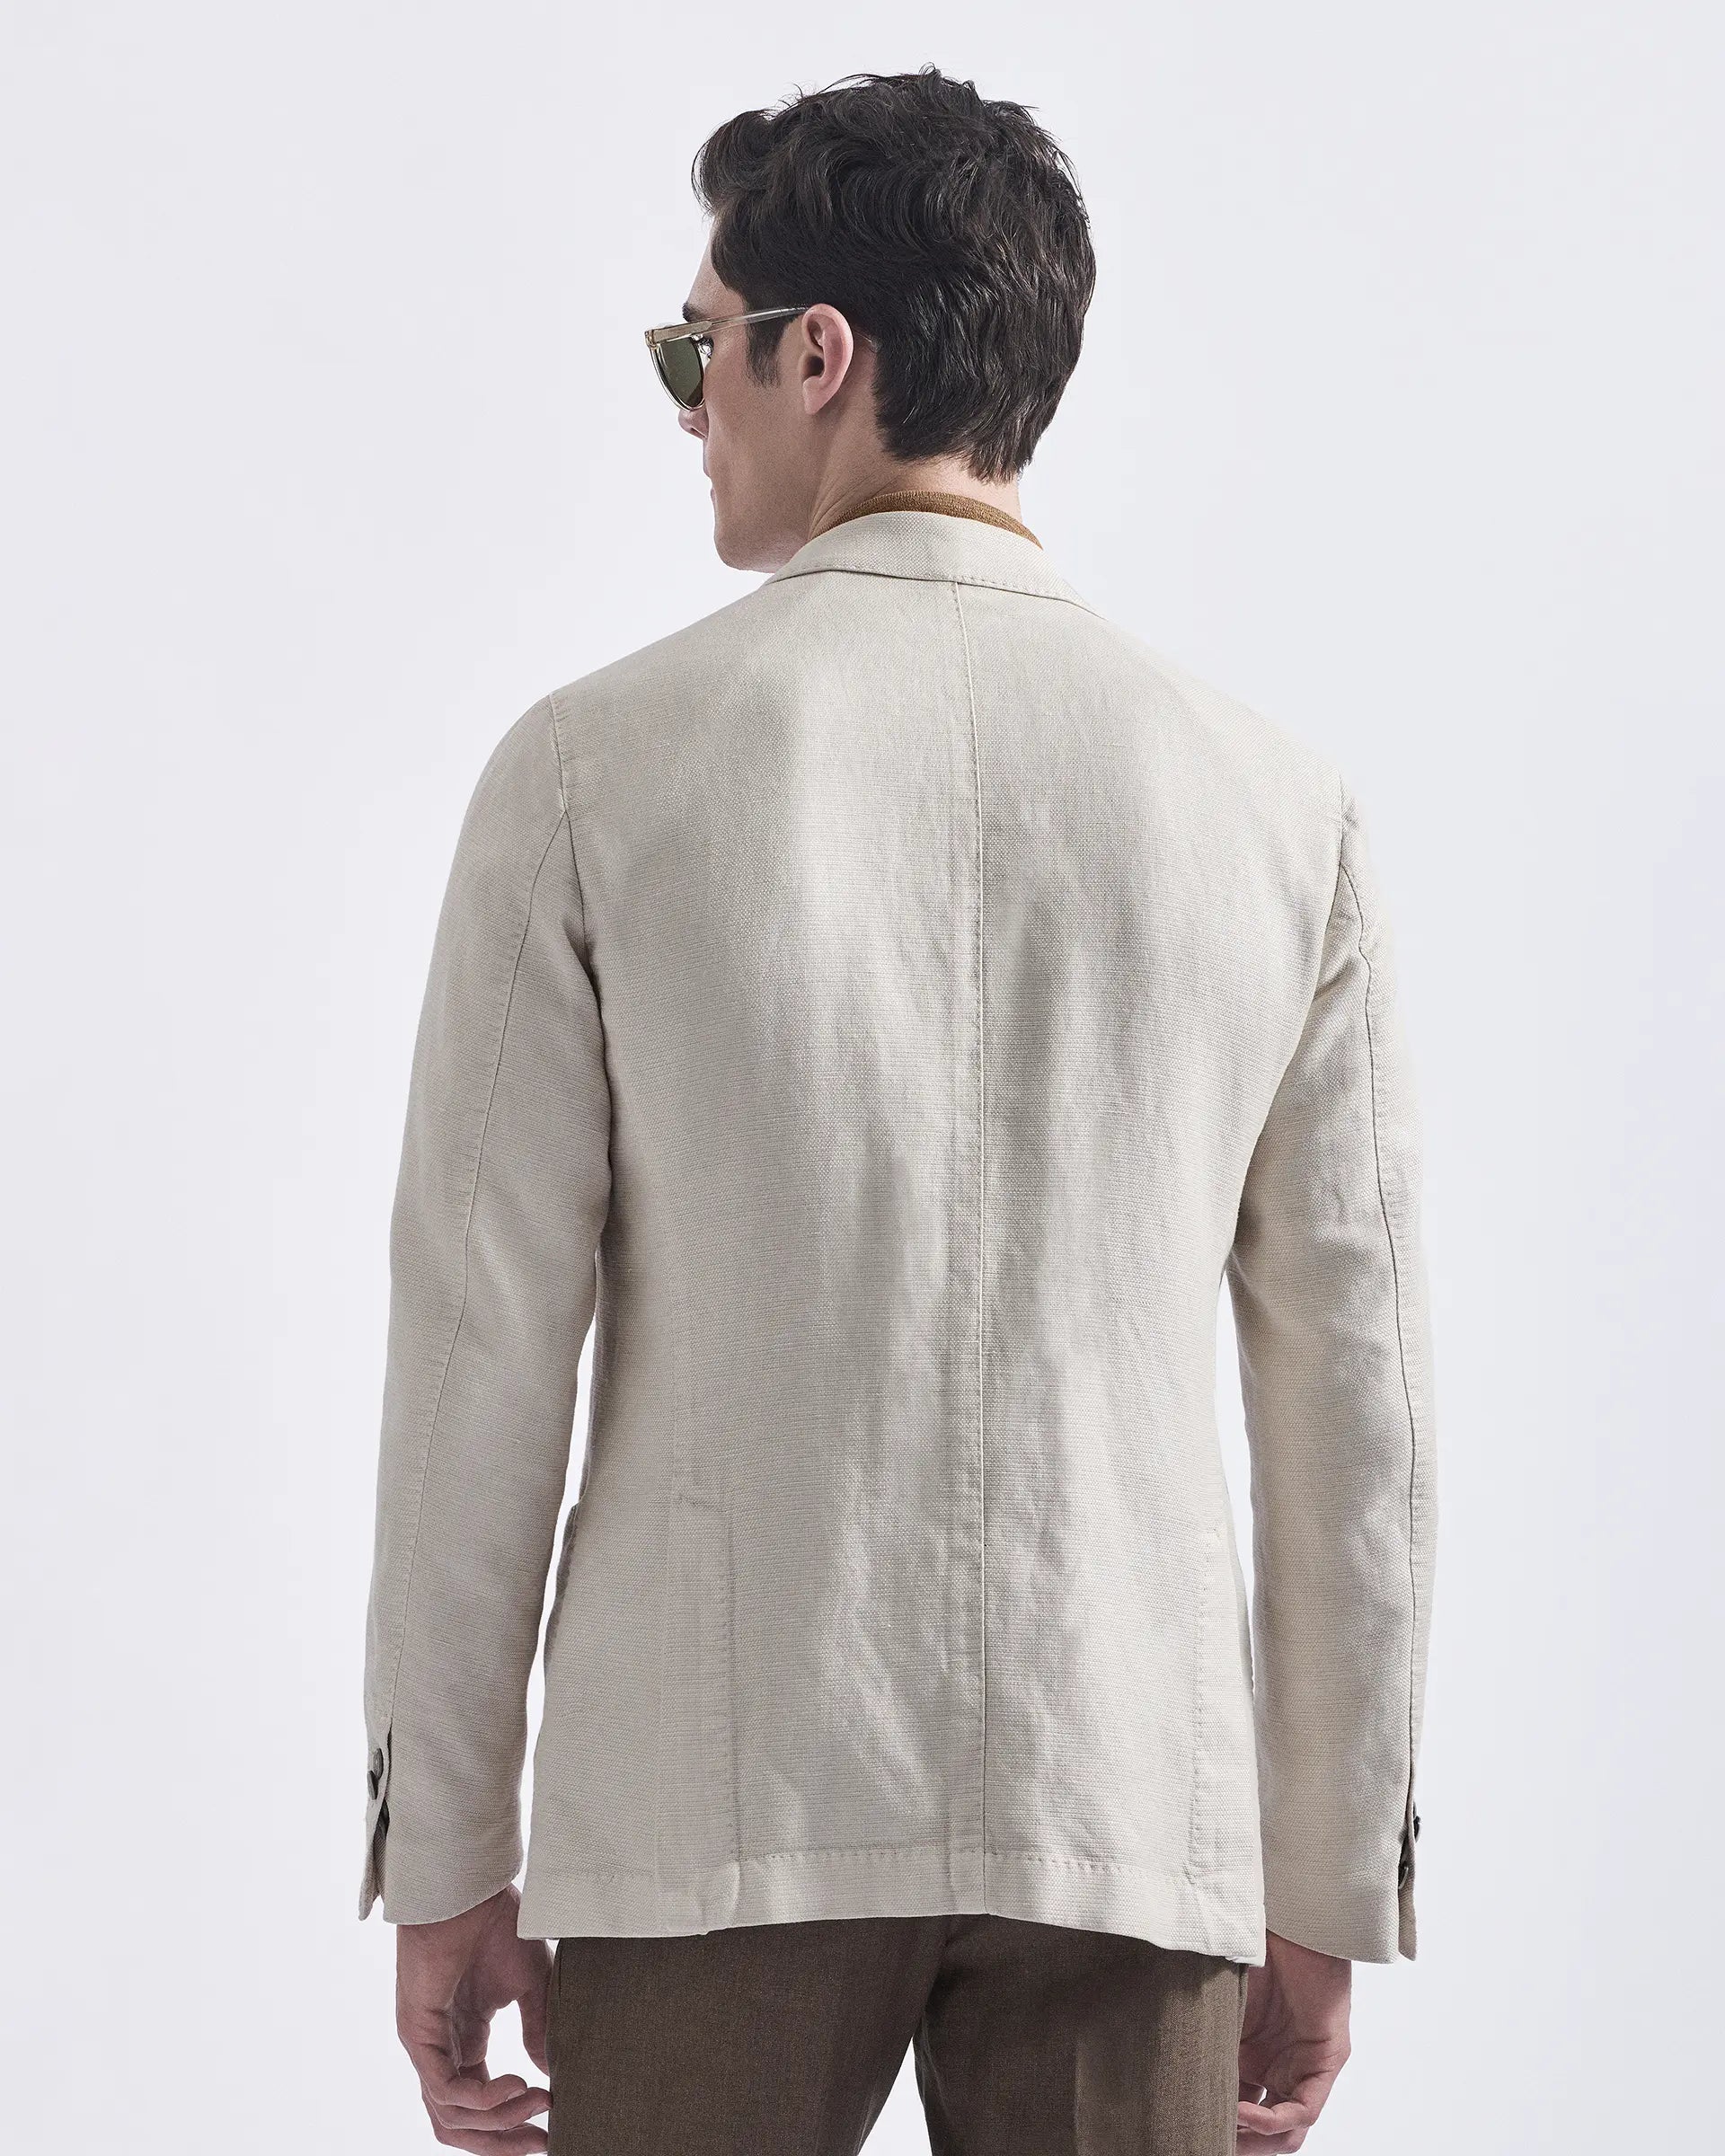 Sand Garment-dyed cotton and linen Jacket